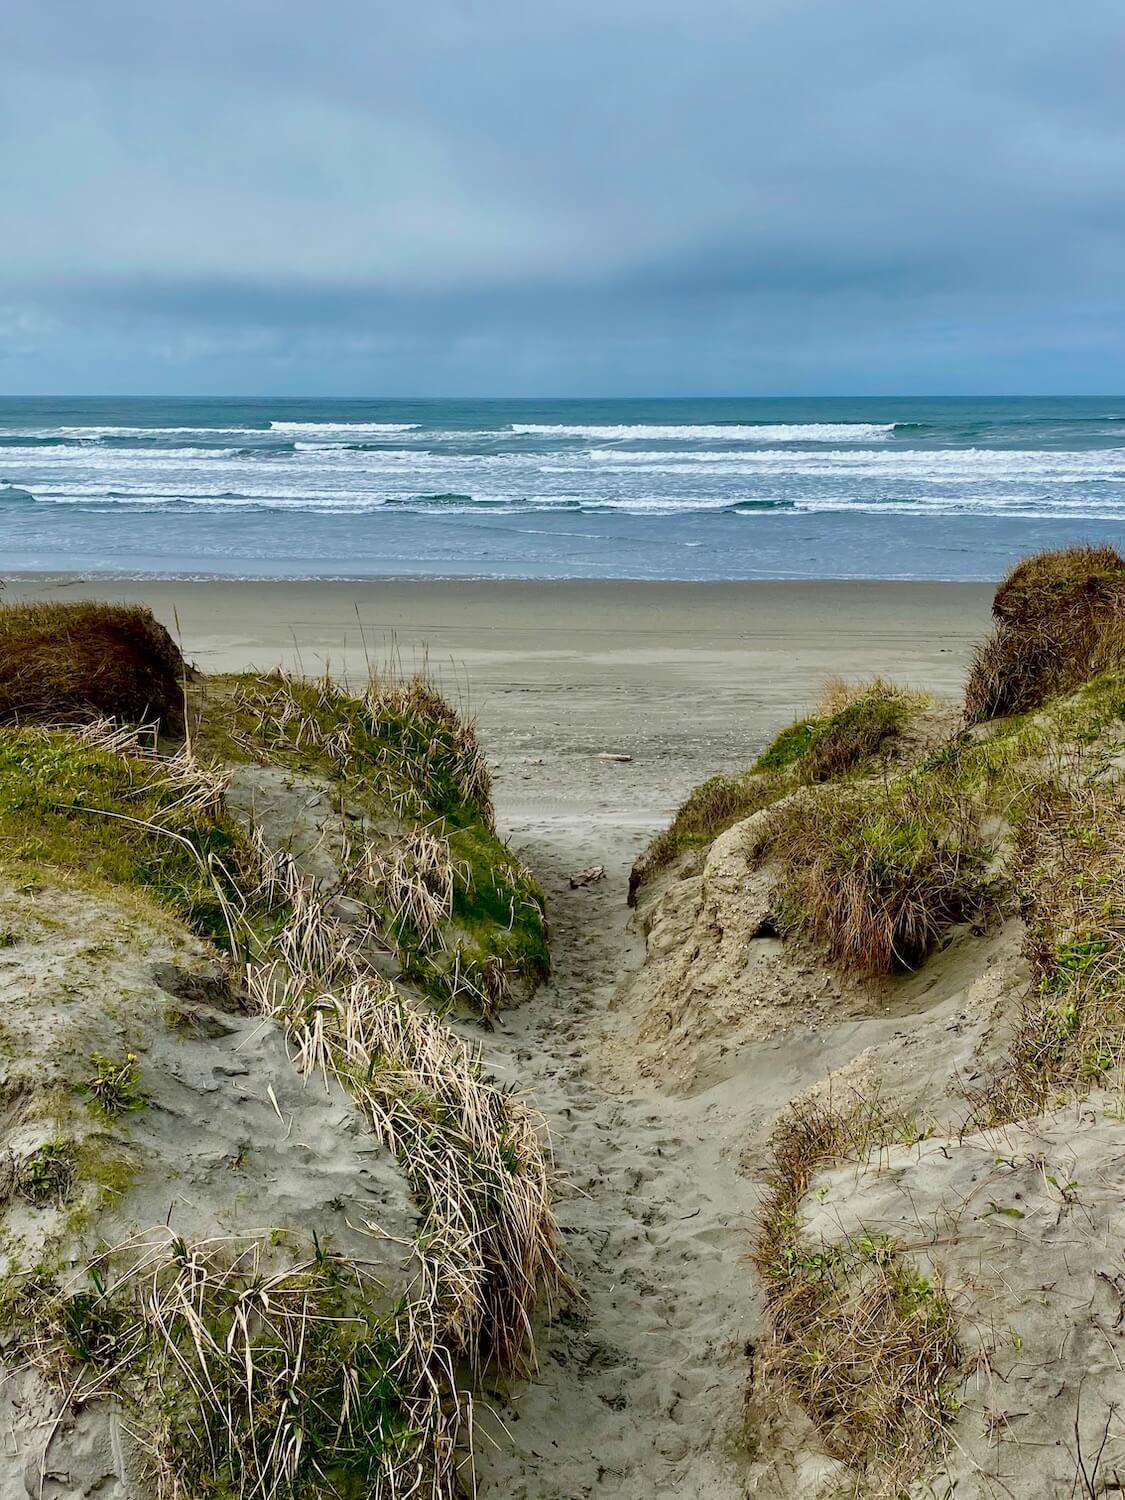 A shot of the Washington Coast reveals sand formations covered with sea grass leading out to the waves of the Pacific Ocean.